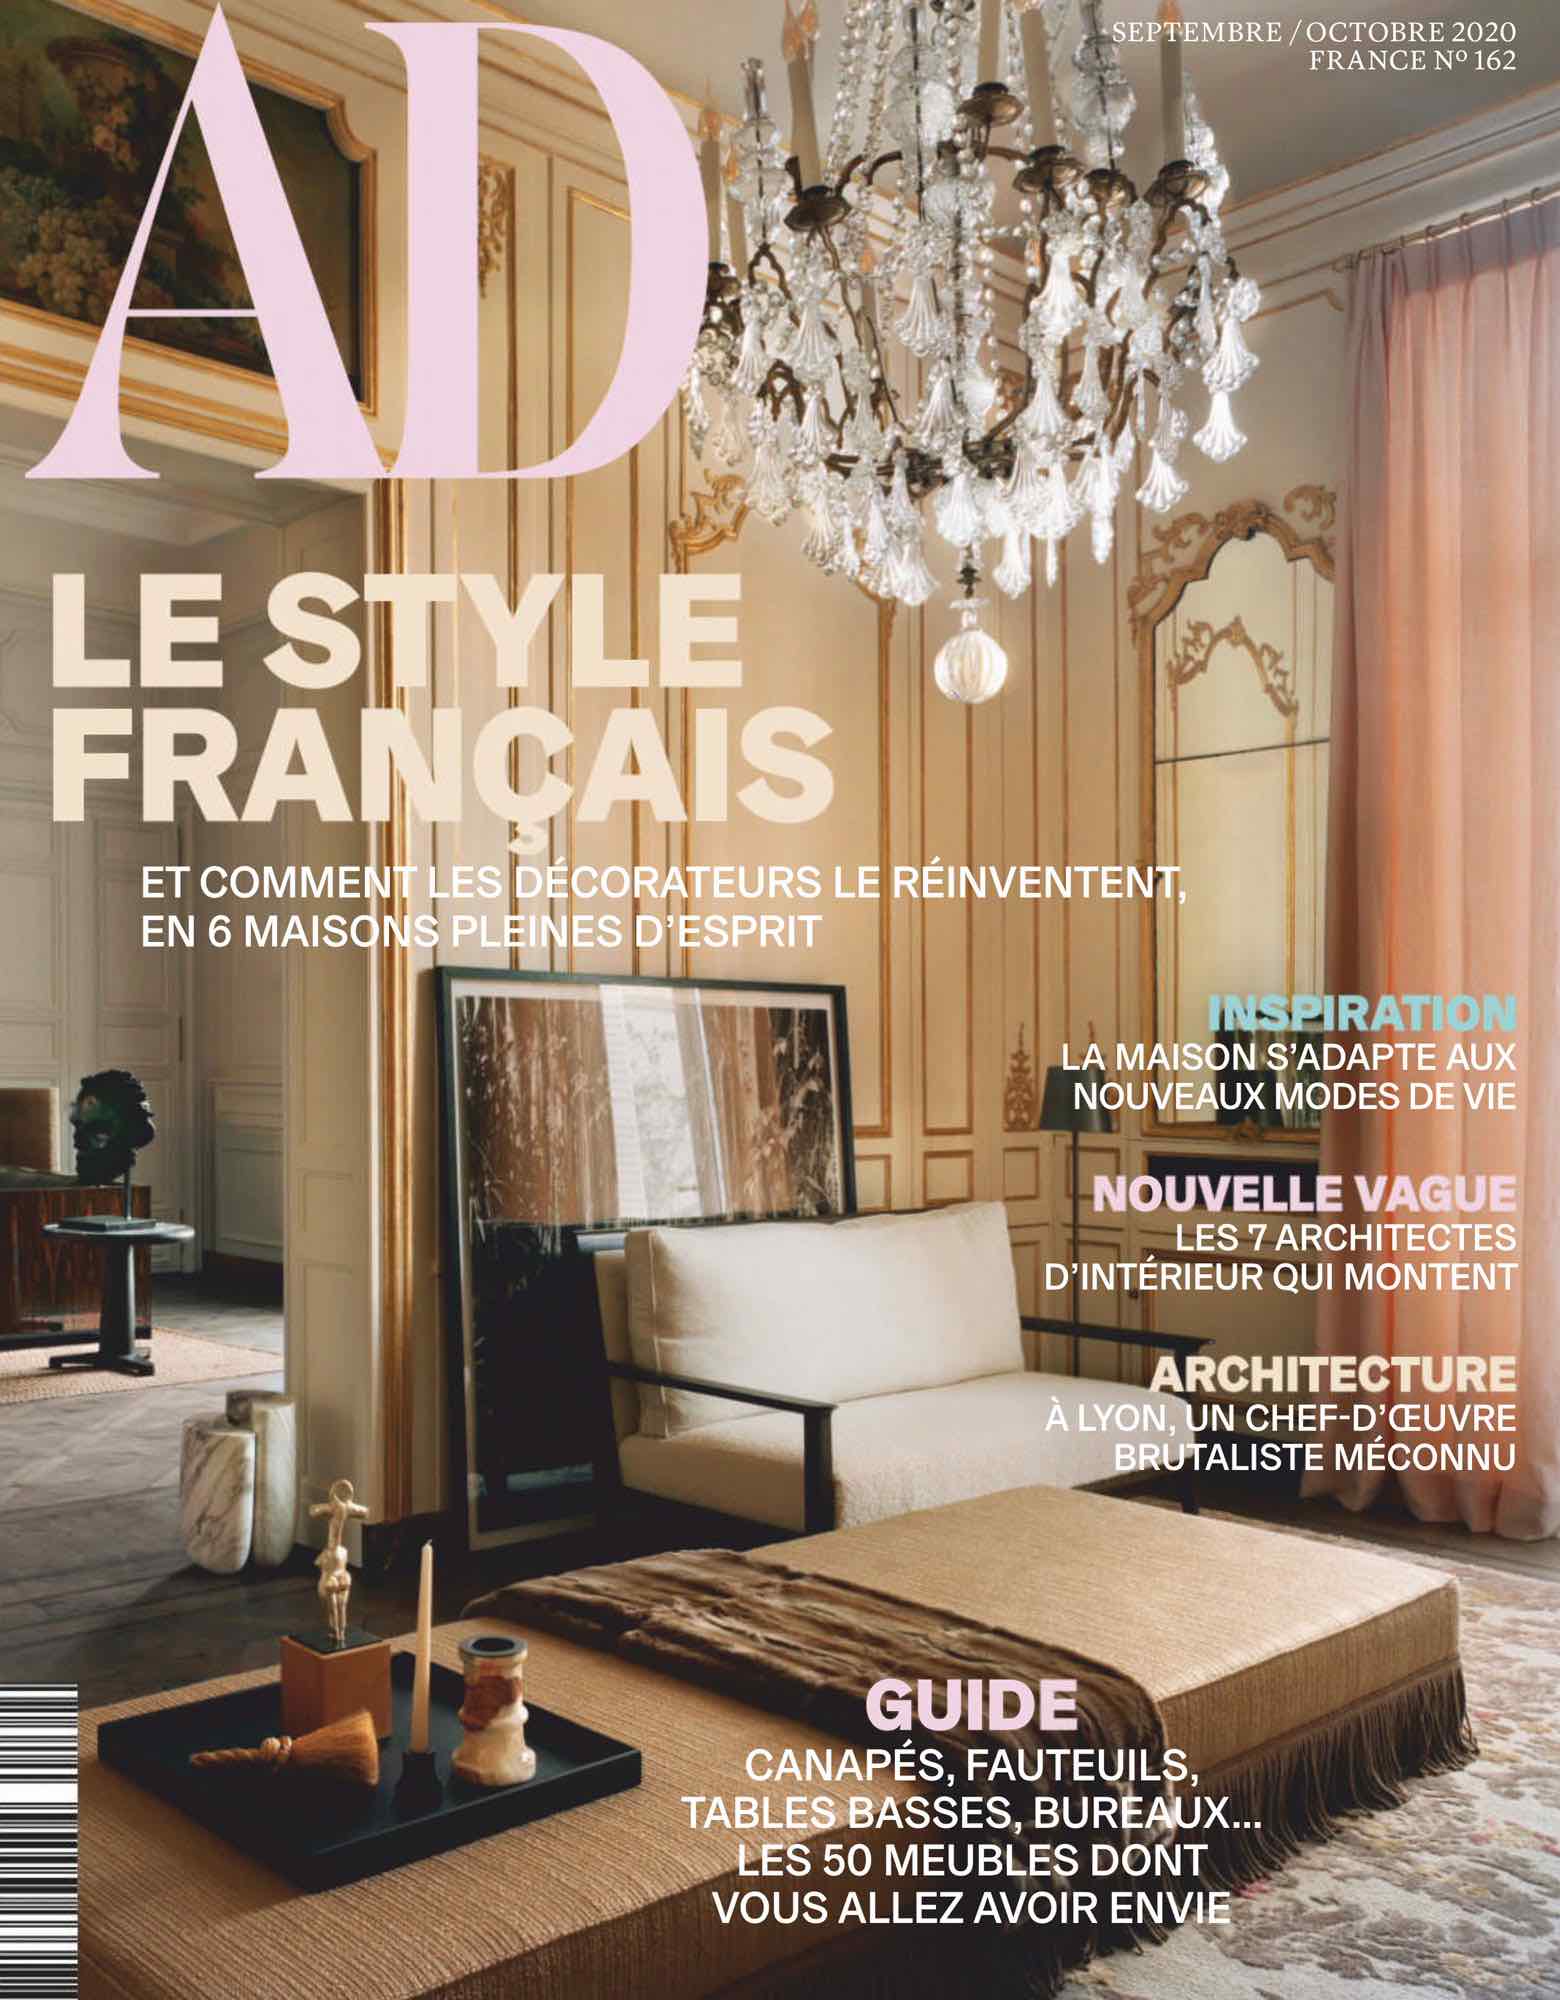 An image of the cover of October 2020 of AD France featuring Carol Egans furniture.